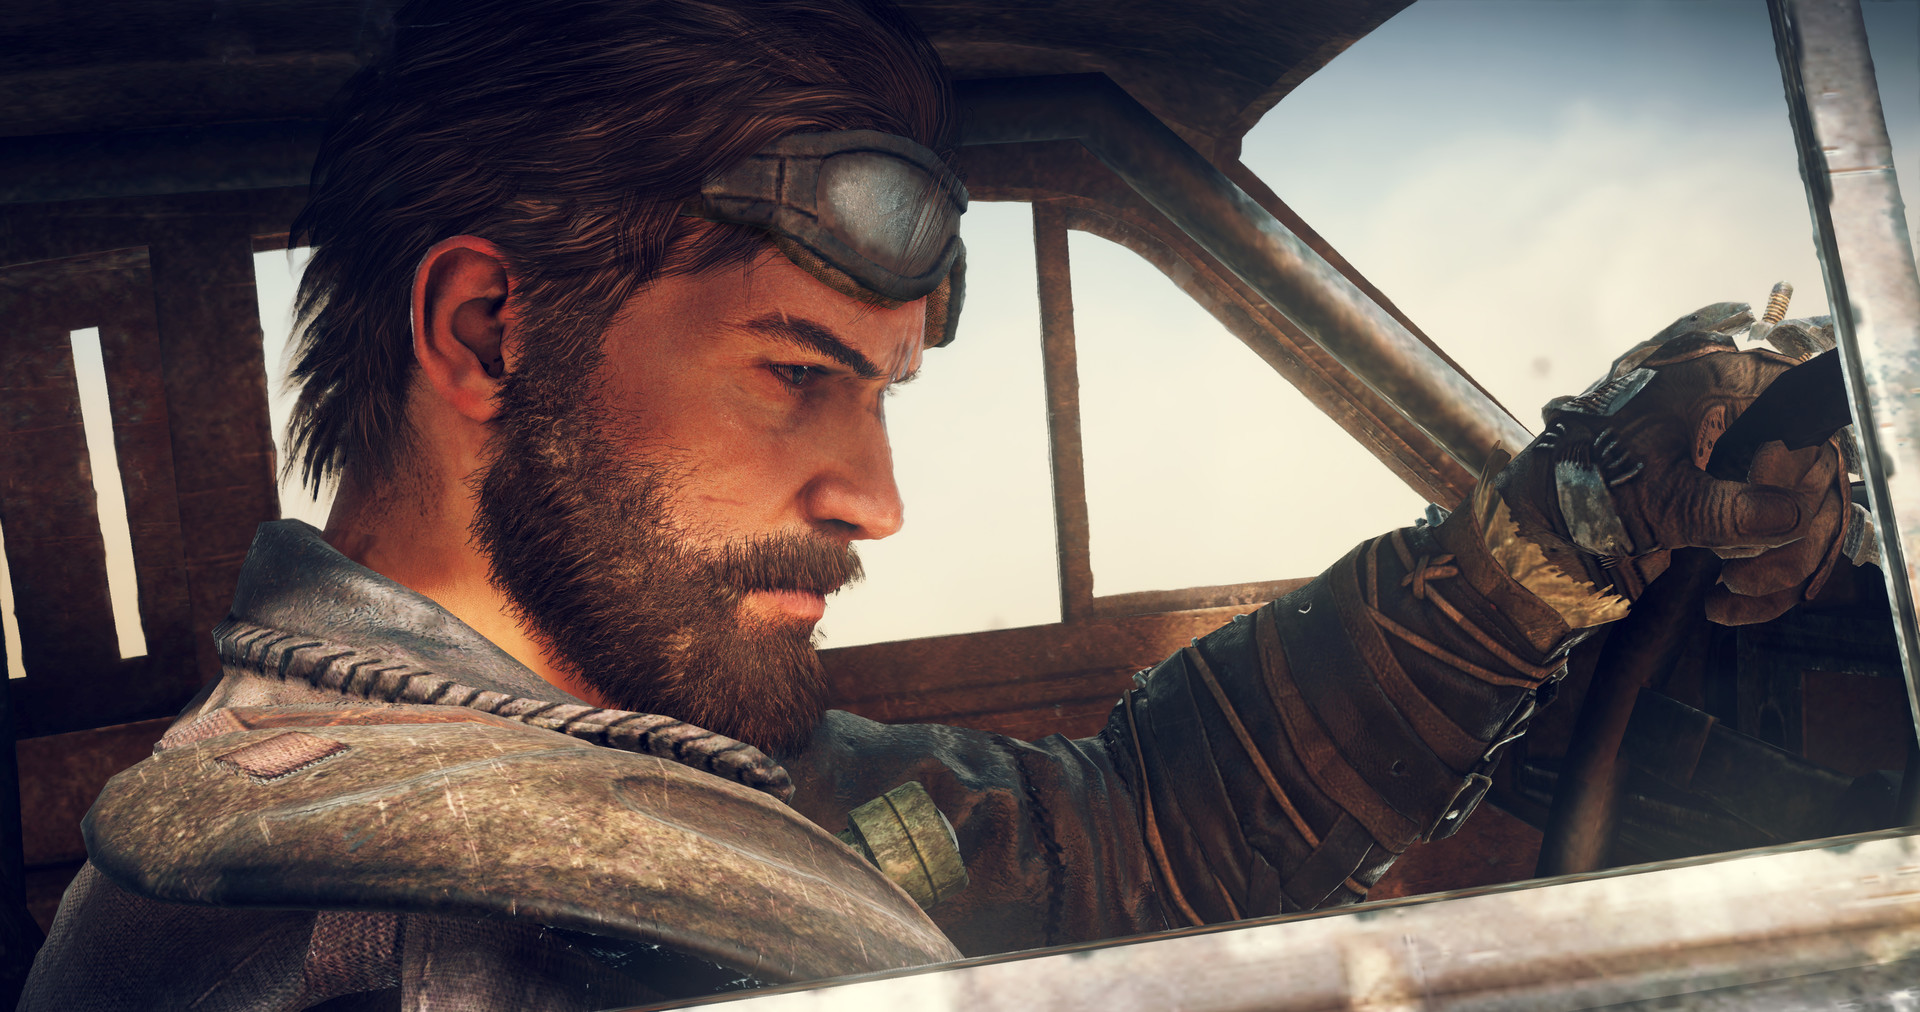  Mad Max 2 may have been in development before the pandemic 